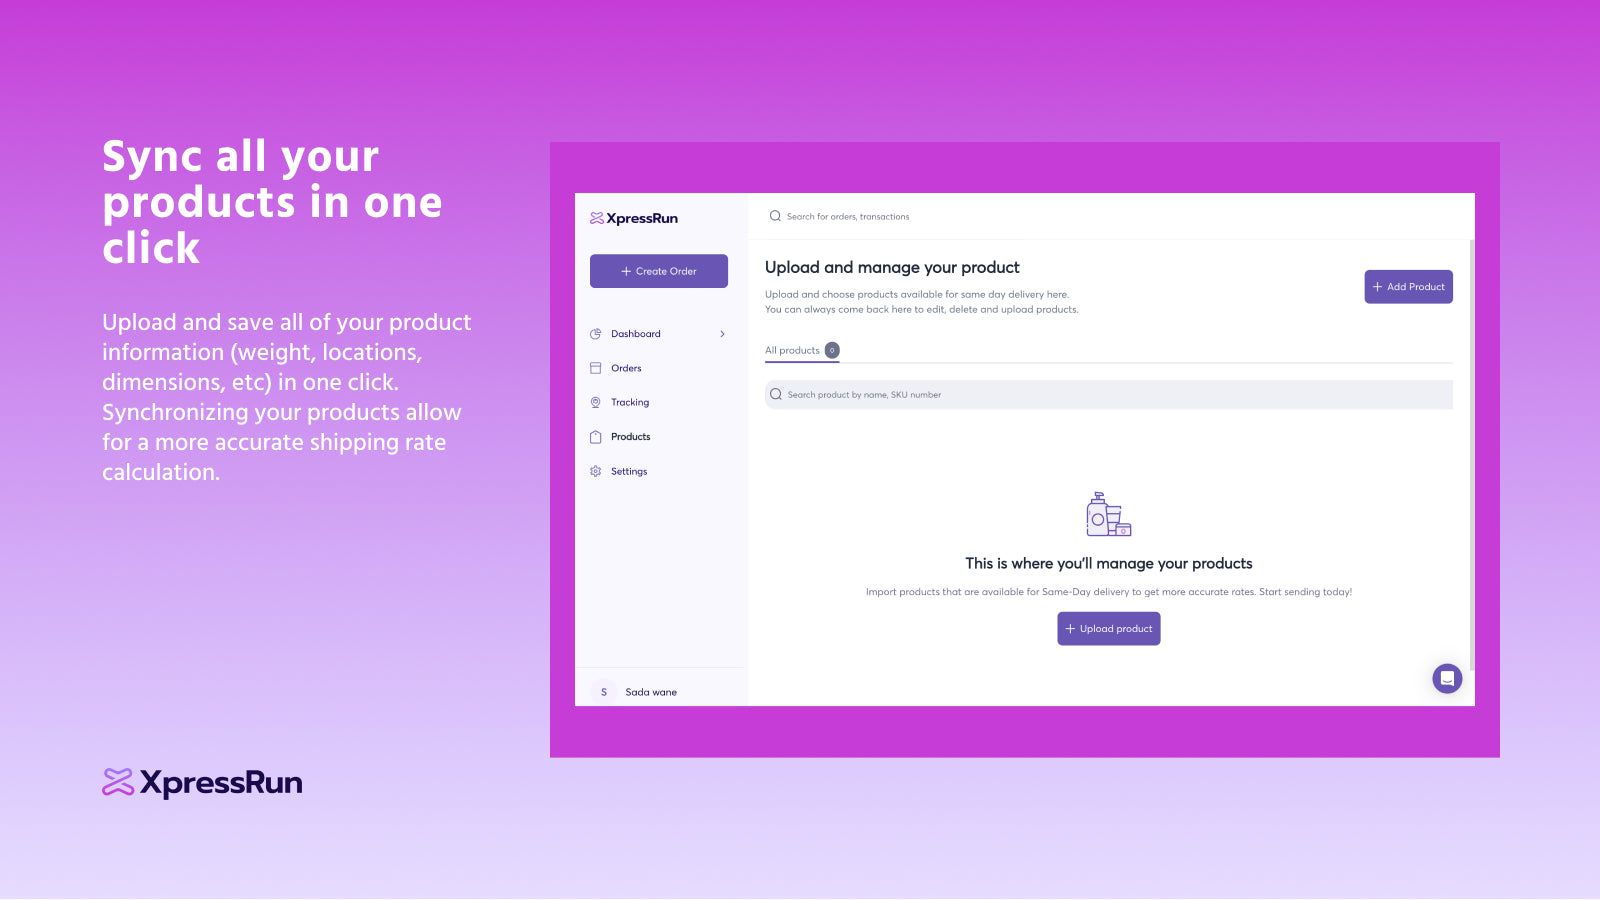 Sync all of your products in one click